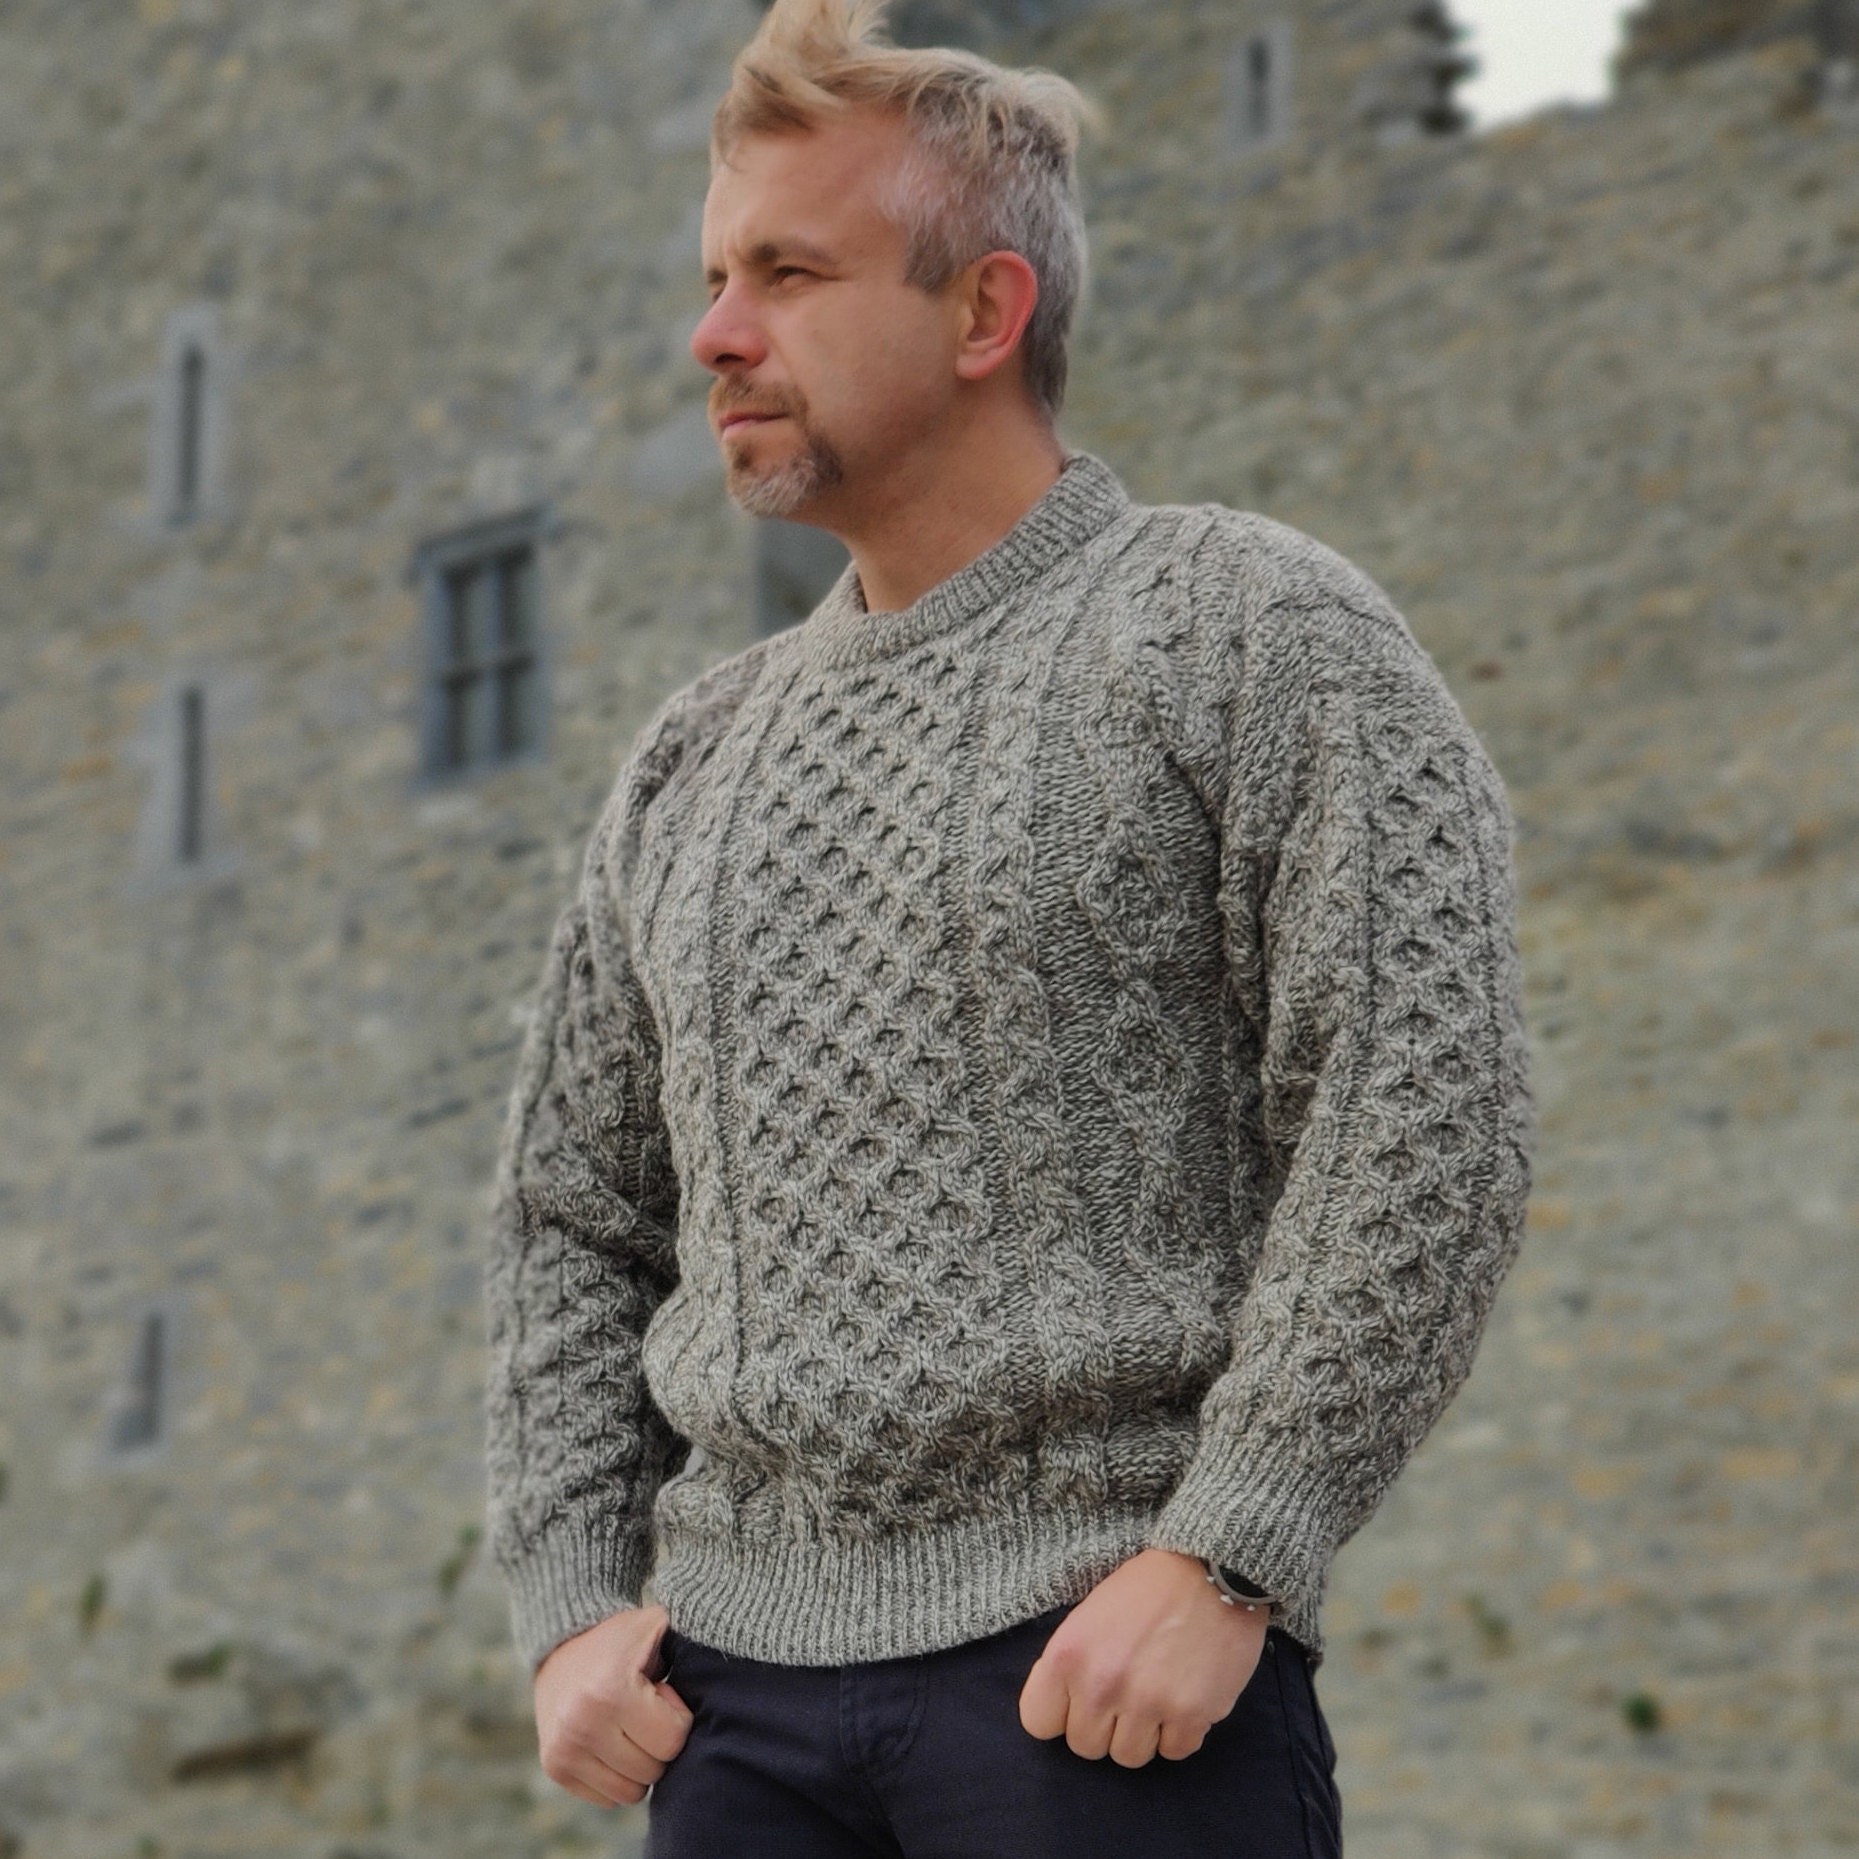 Traditional Aran Sweater - 100% pure new wool - oatmeal - chunky&heavy -  MADE IN IRELAND